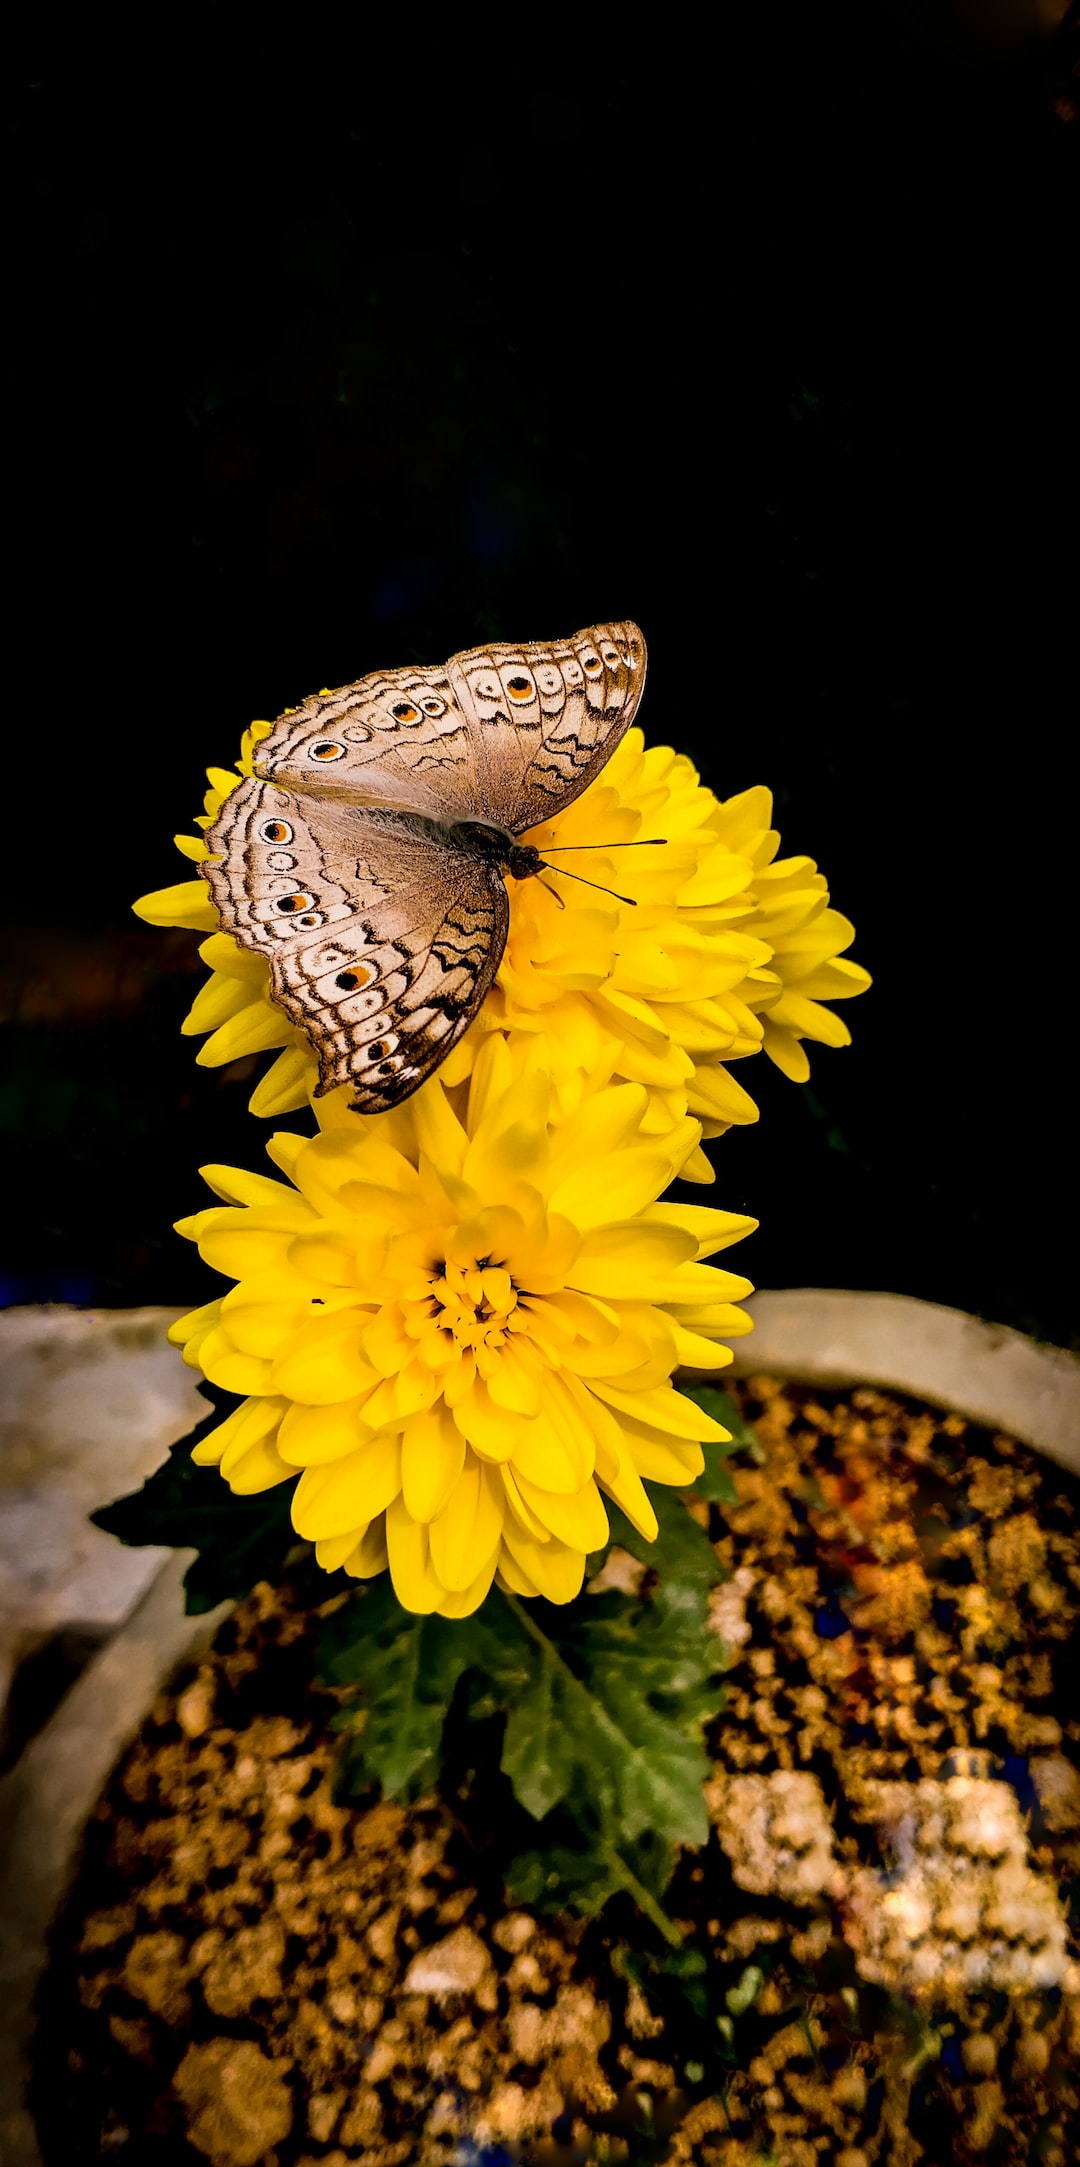 black and white butterfly on yellow flower